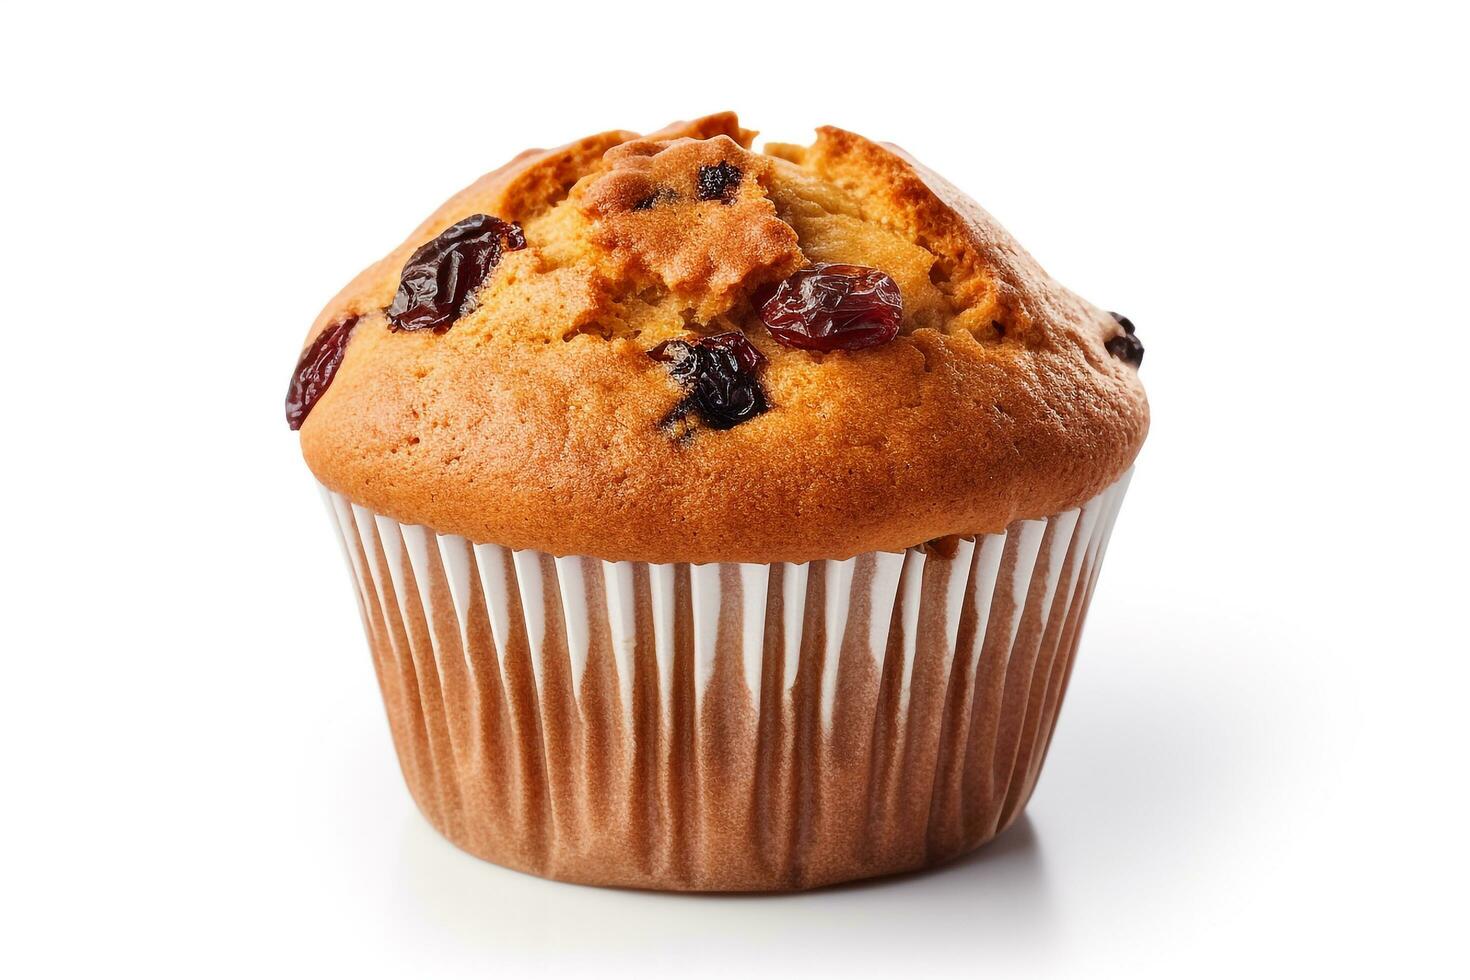 Muffin isolated on a white background photo